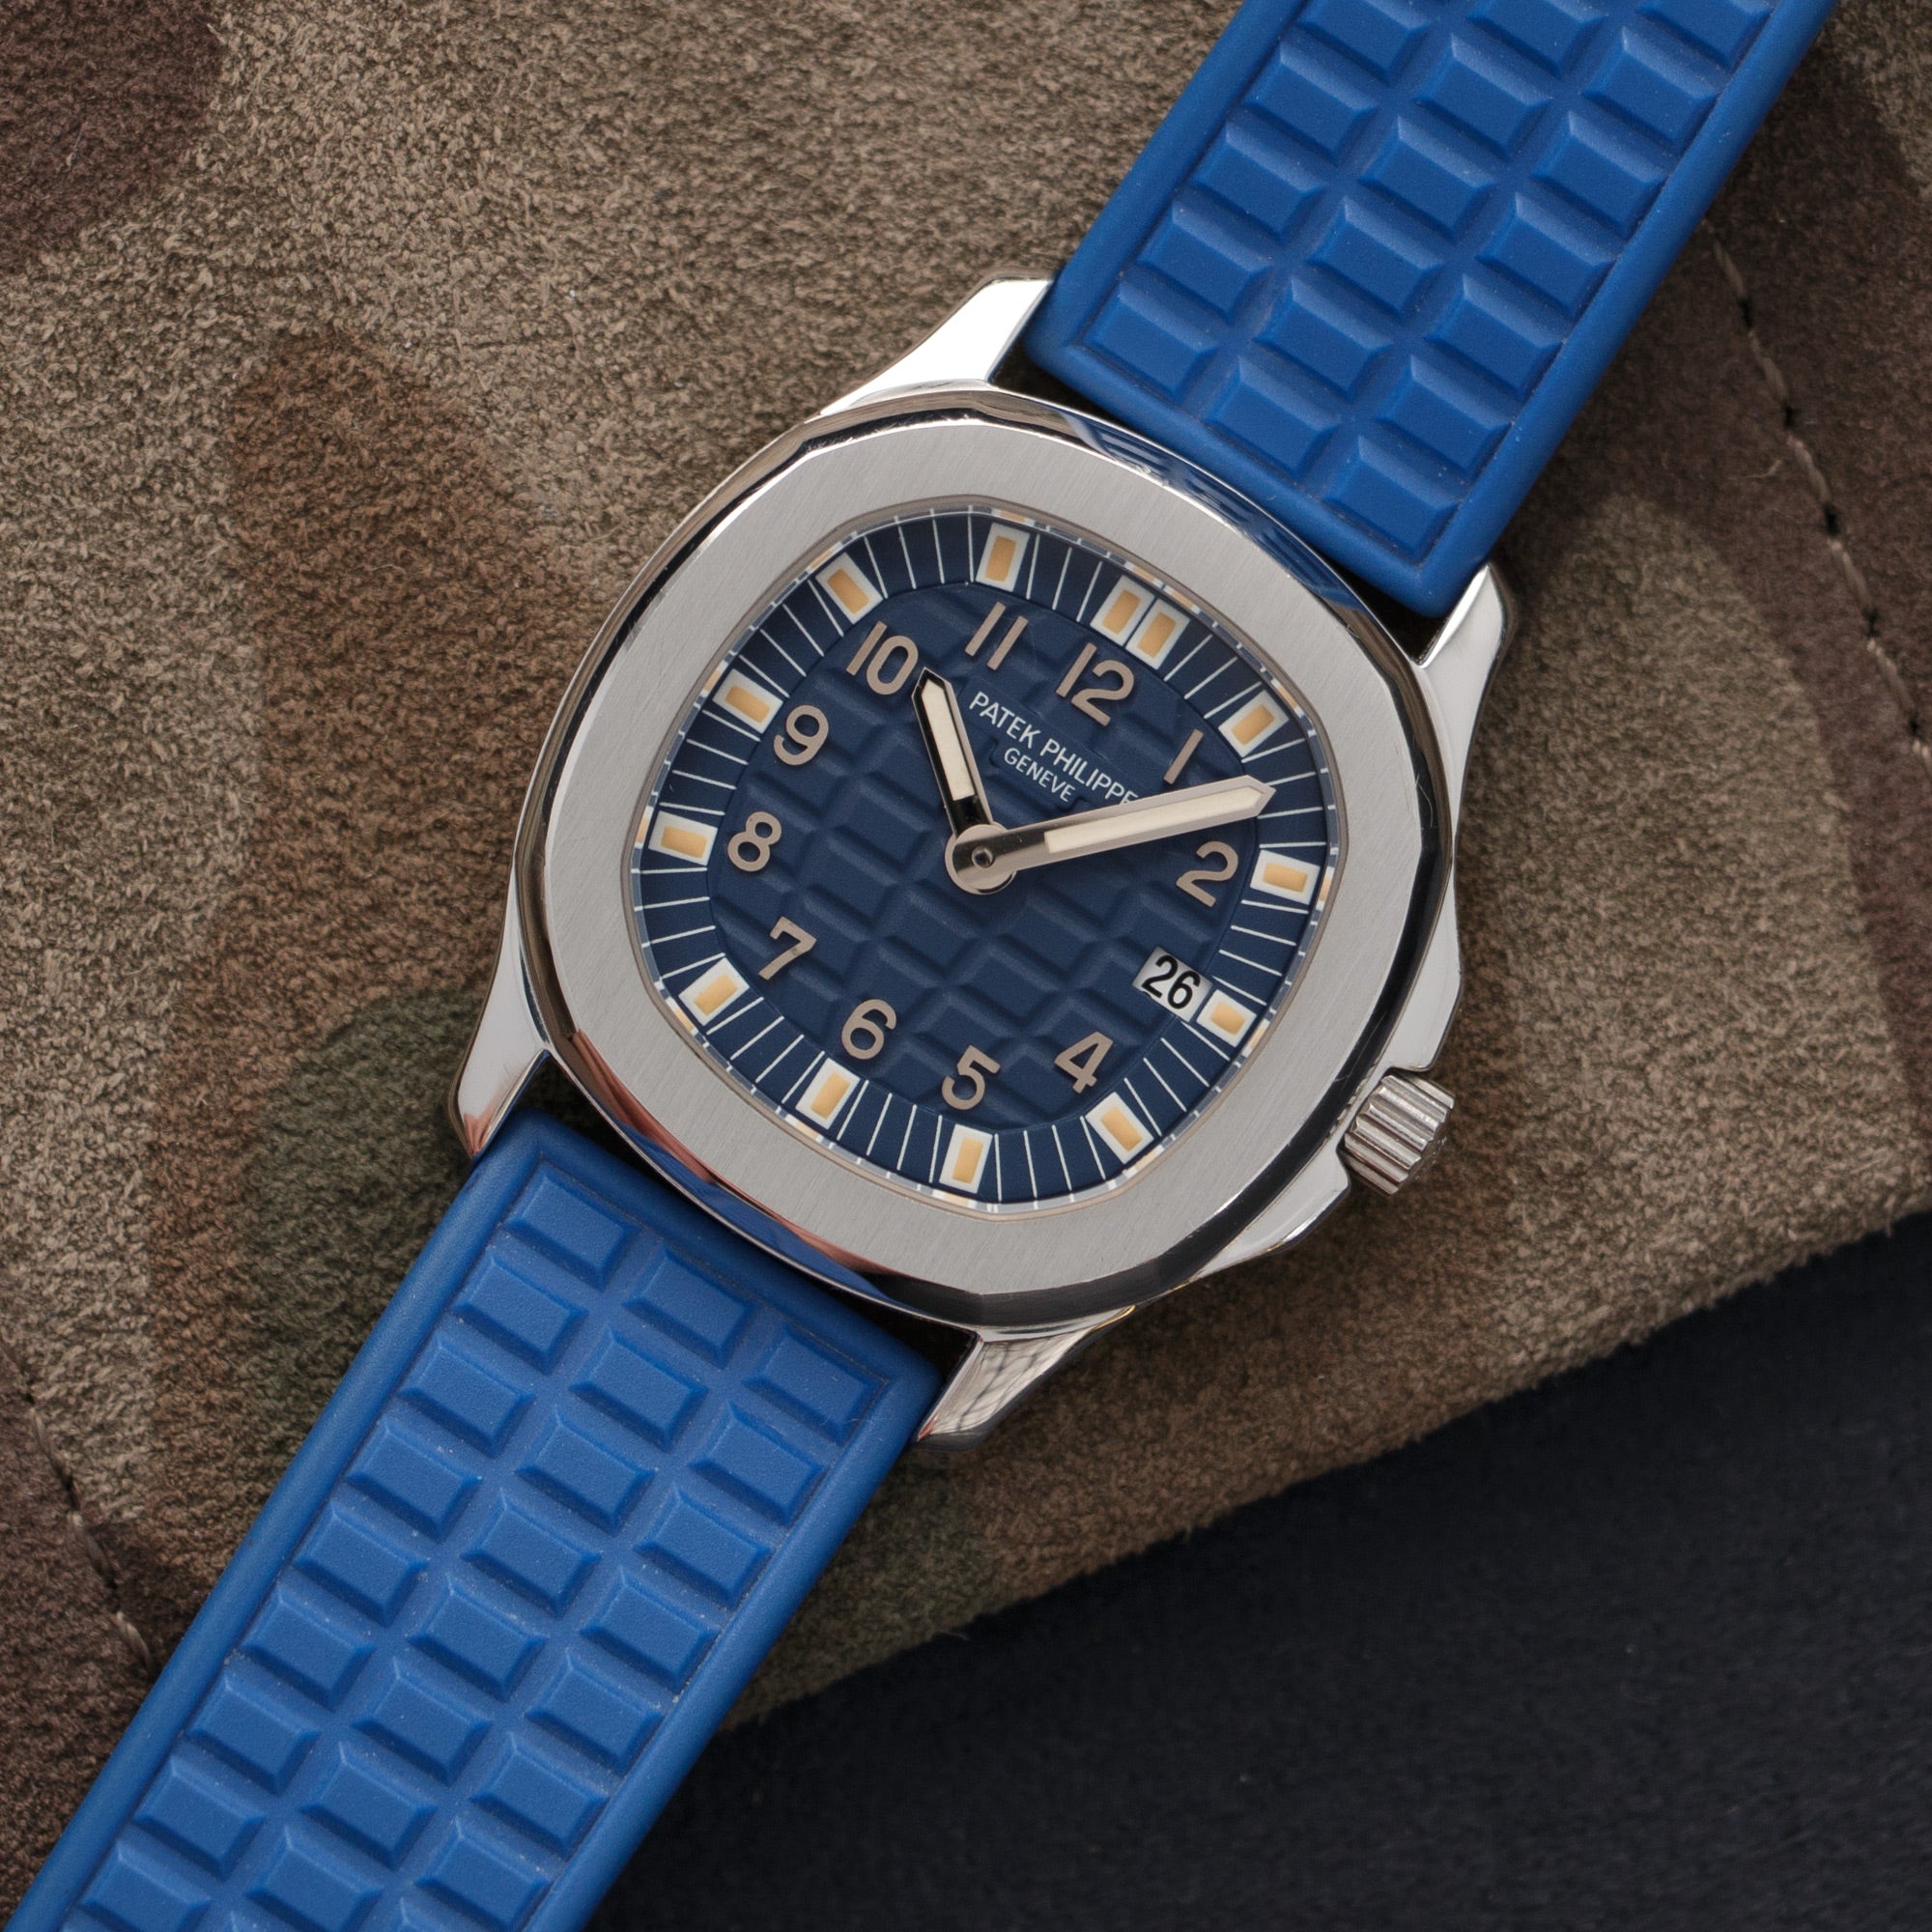 Patek Philippe - Patek Philippe Steel Aquanaut Blue Watch Ref. 4960, Made for the Japanese Market - The Keystone Watches